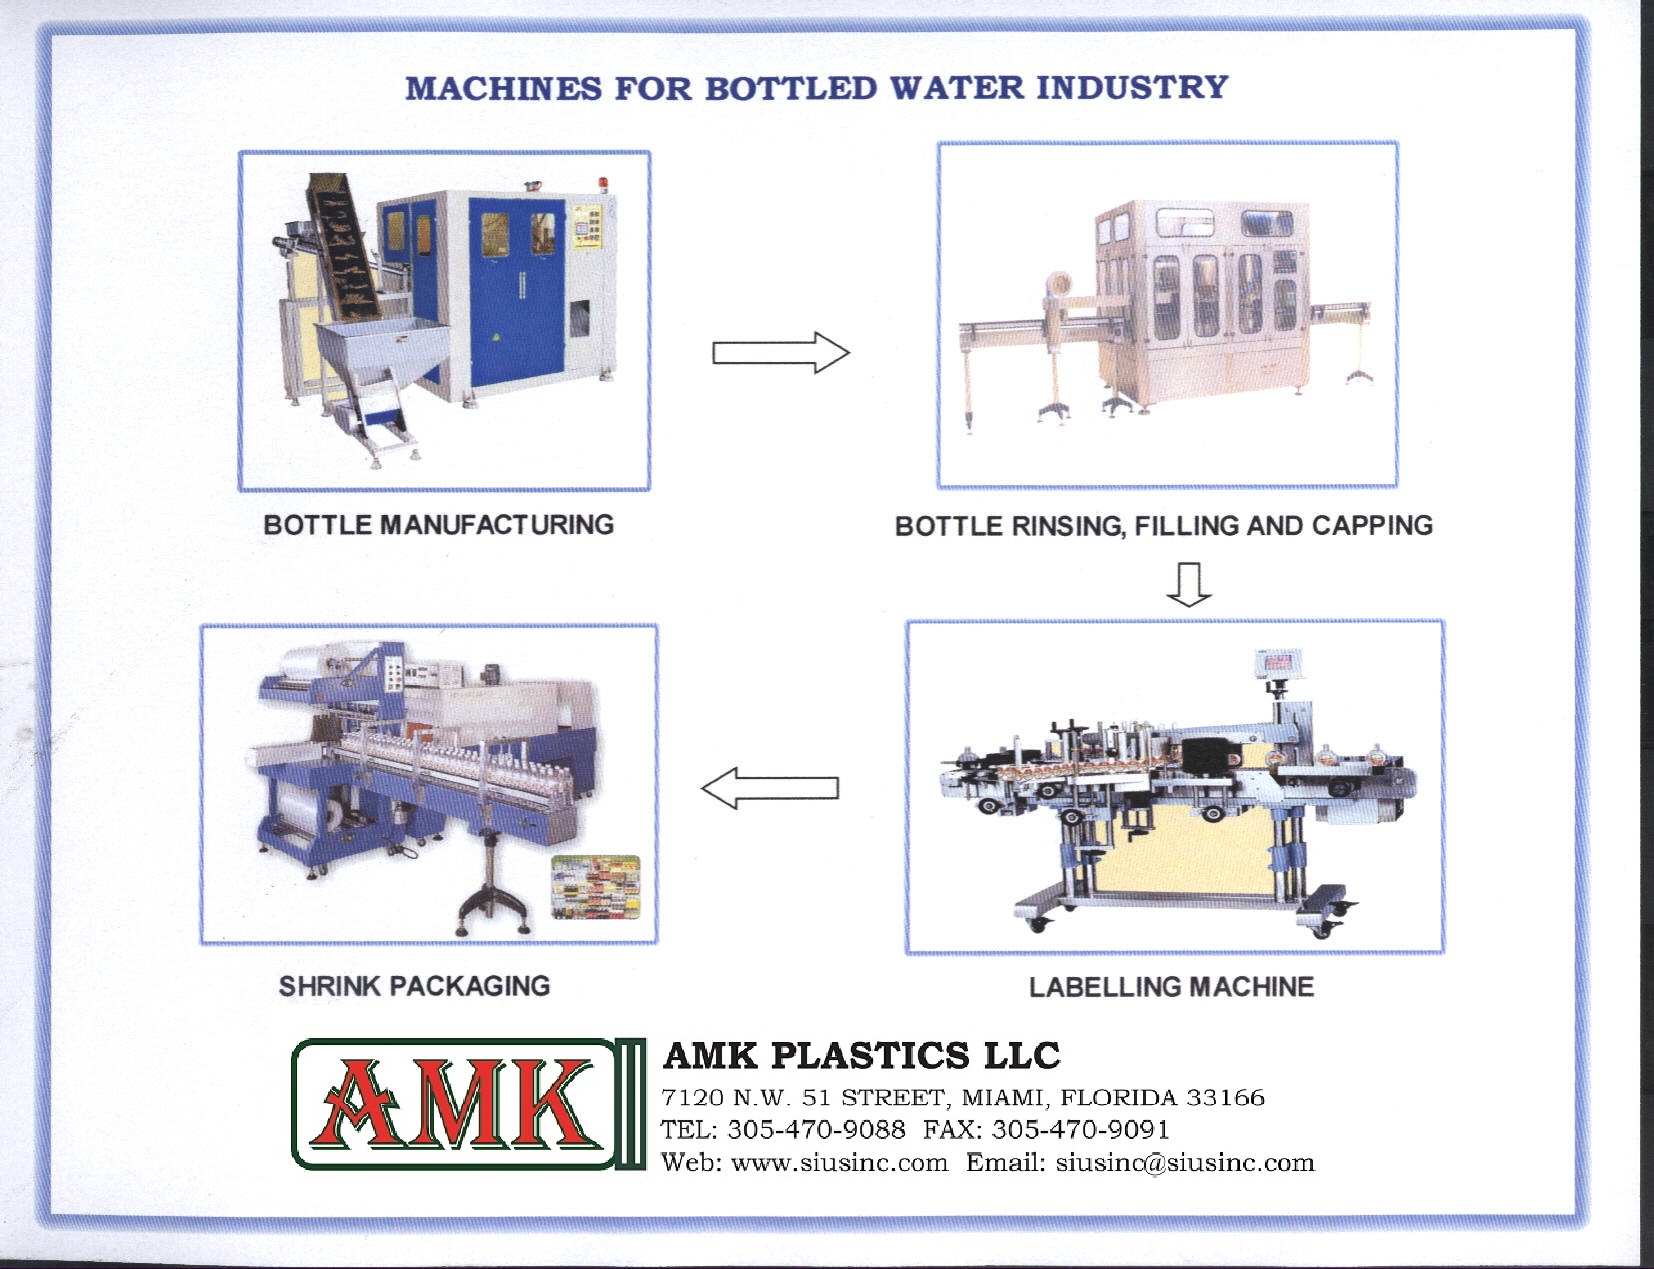 MACHINES FOR BOTTLED WATER INDUSTRY